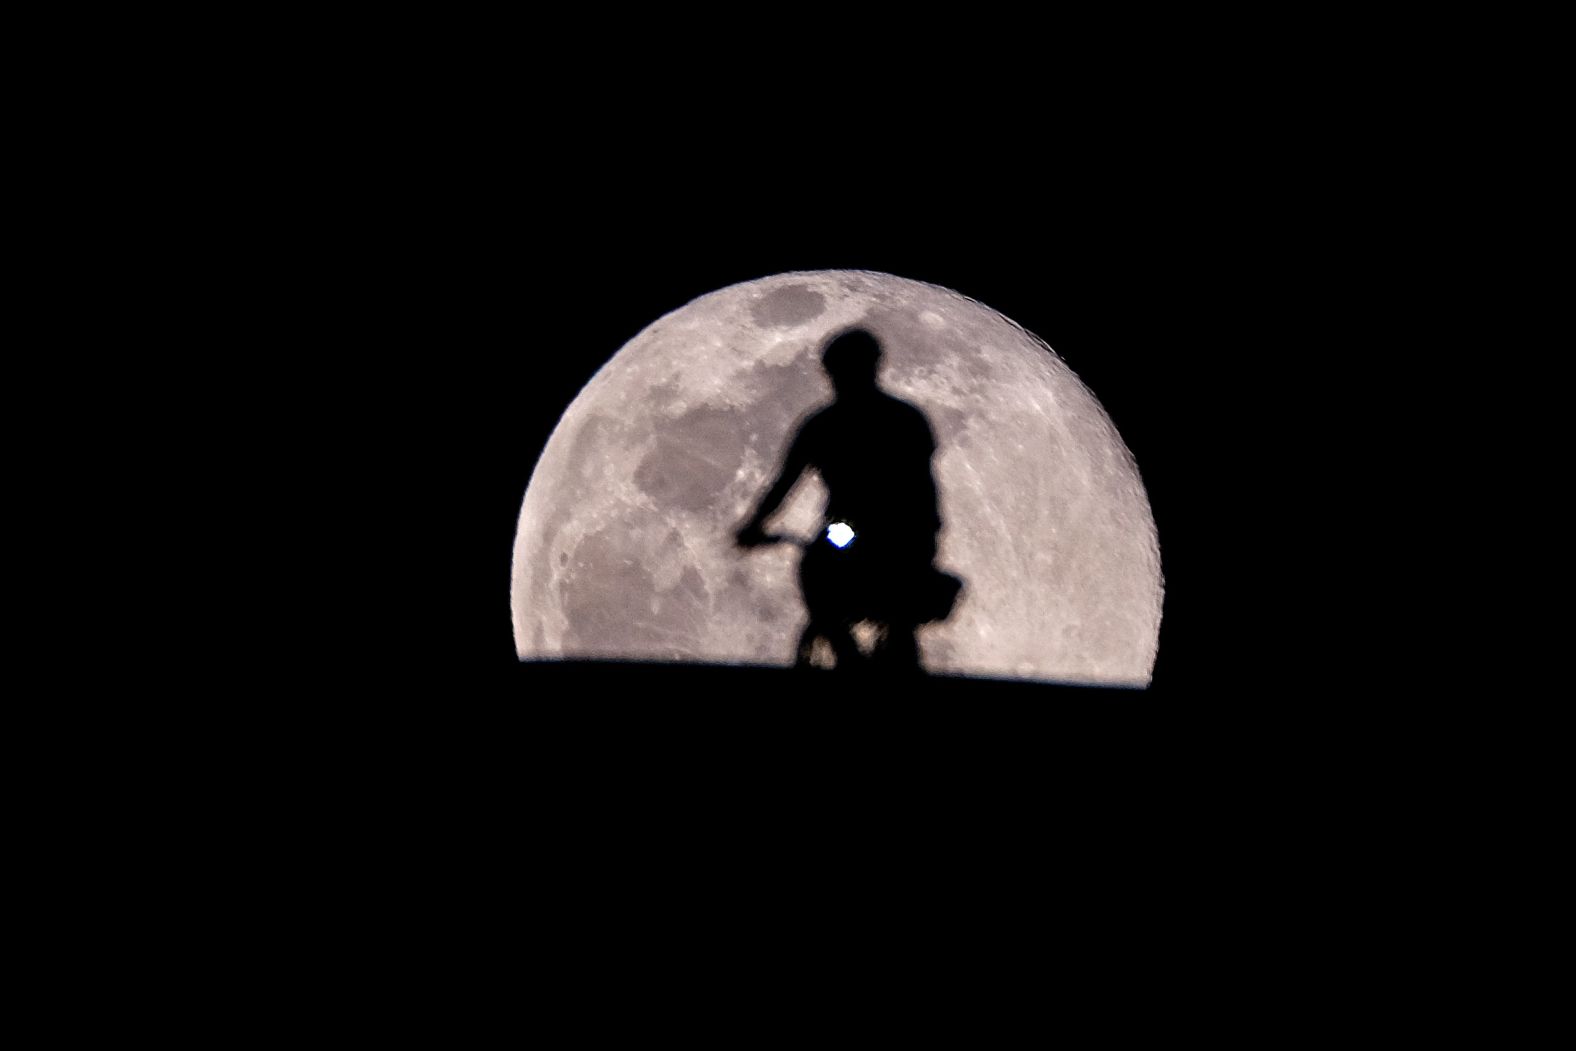 A cyclist in Los Angeles, California is silhouetted against the backdrop of the "Worm Moon".